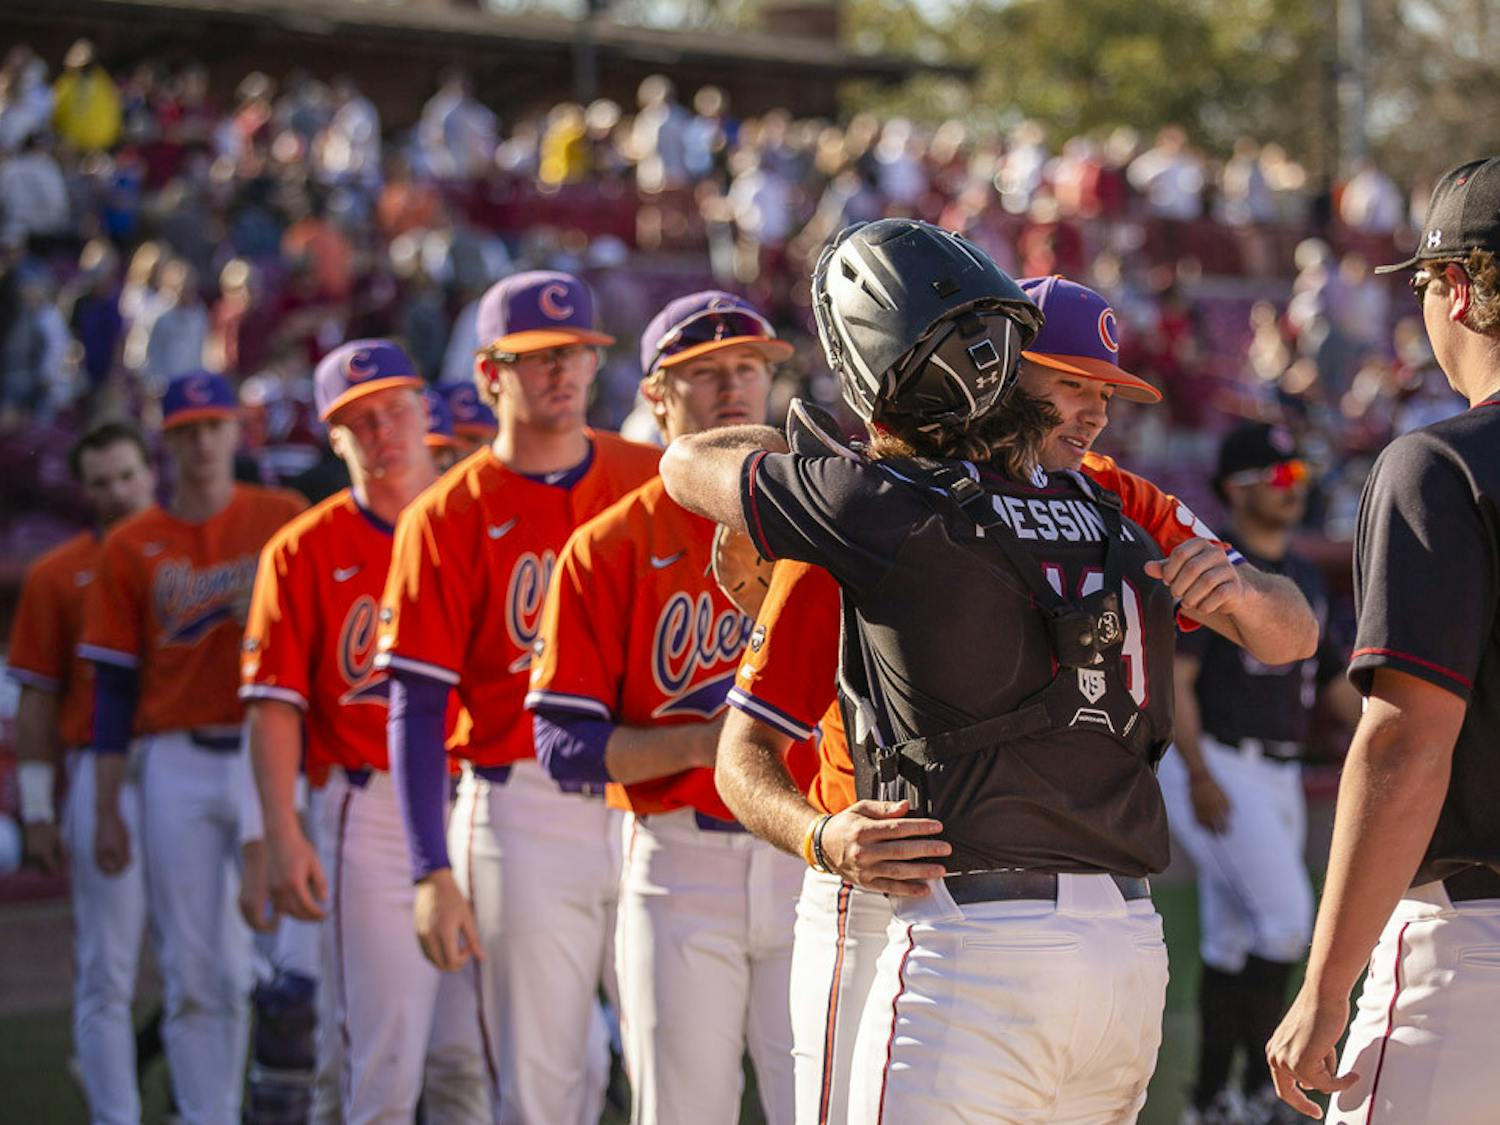 Sophomore catcher Cole Messina hugs one of Clemson's players after the final game of the series between South Carolina and Clemson on March 5, 2023, at Founders Park. The Gamecocks beat the Tigers 7-1, winning 2-1 in the series.&nbsp;